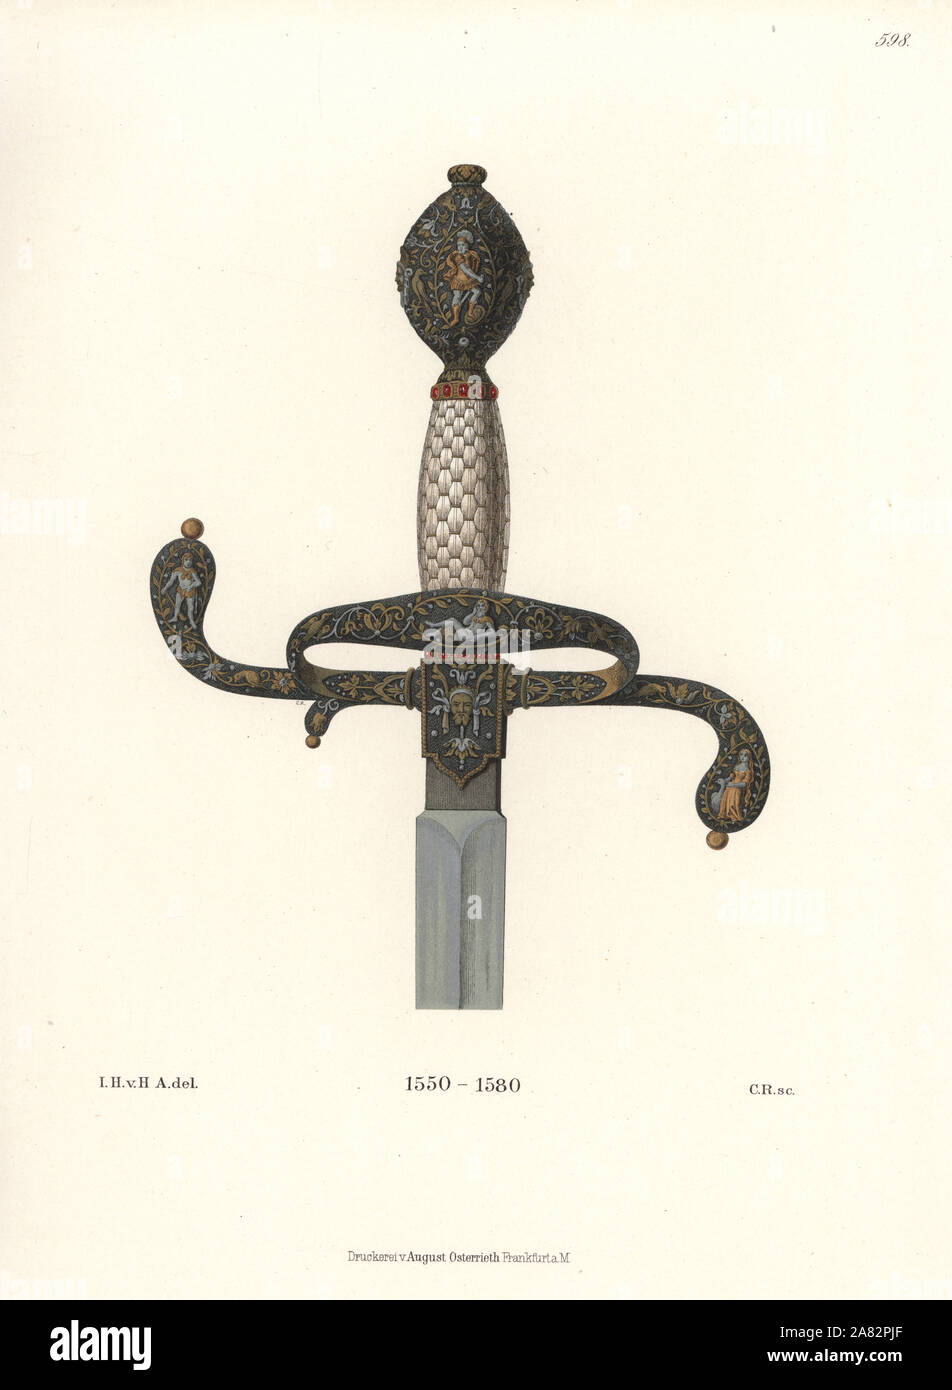 Superb sword hilt from the mid-16th century. Guard and pommel in black iron decorated with gold and silver figures, grip with mesh of gold wire in a feather pattern. Chromolithograph from Hefner-Alteneck's Costumes, Artworks and Appliances from the Middle Ages to the 17th Century, Frankfurt, 1889. Illustration by Dr. Jakob Heinrich von Hefner-Alteneck, lithographed by C. Regnier. Dr. Hefner-Alteneck (1811-1903) was a German museum curator, archaeologist, art historian, illustrator and etcher. Stock Photo